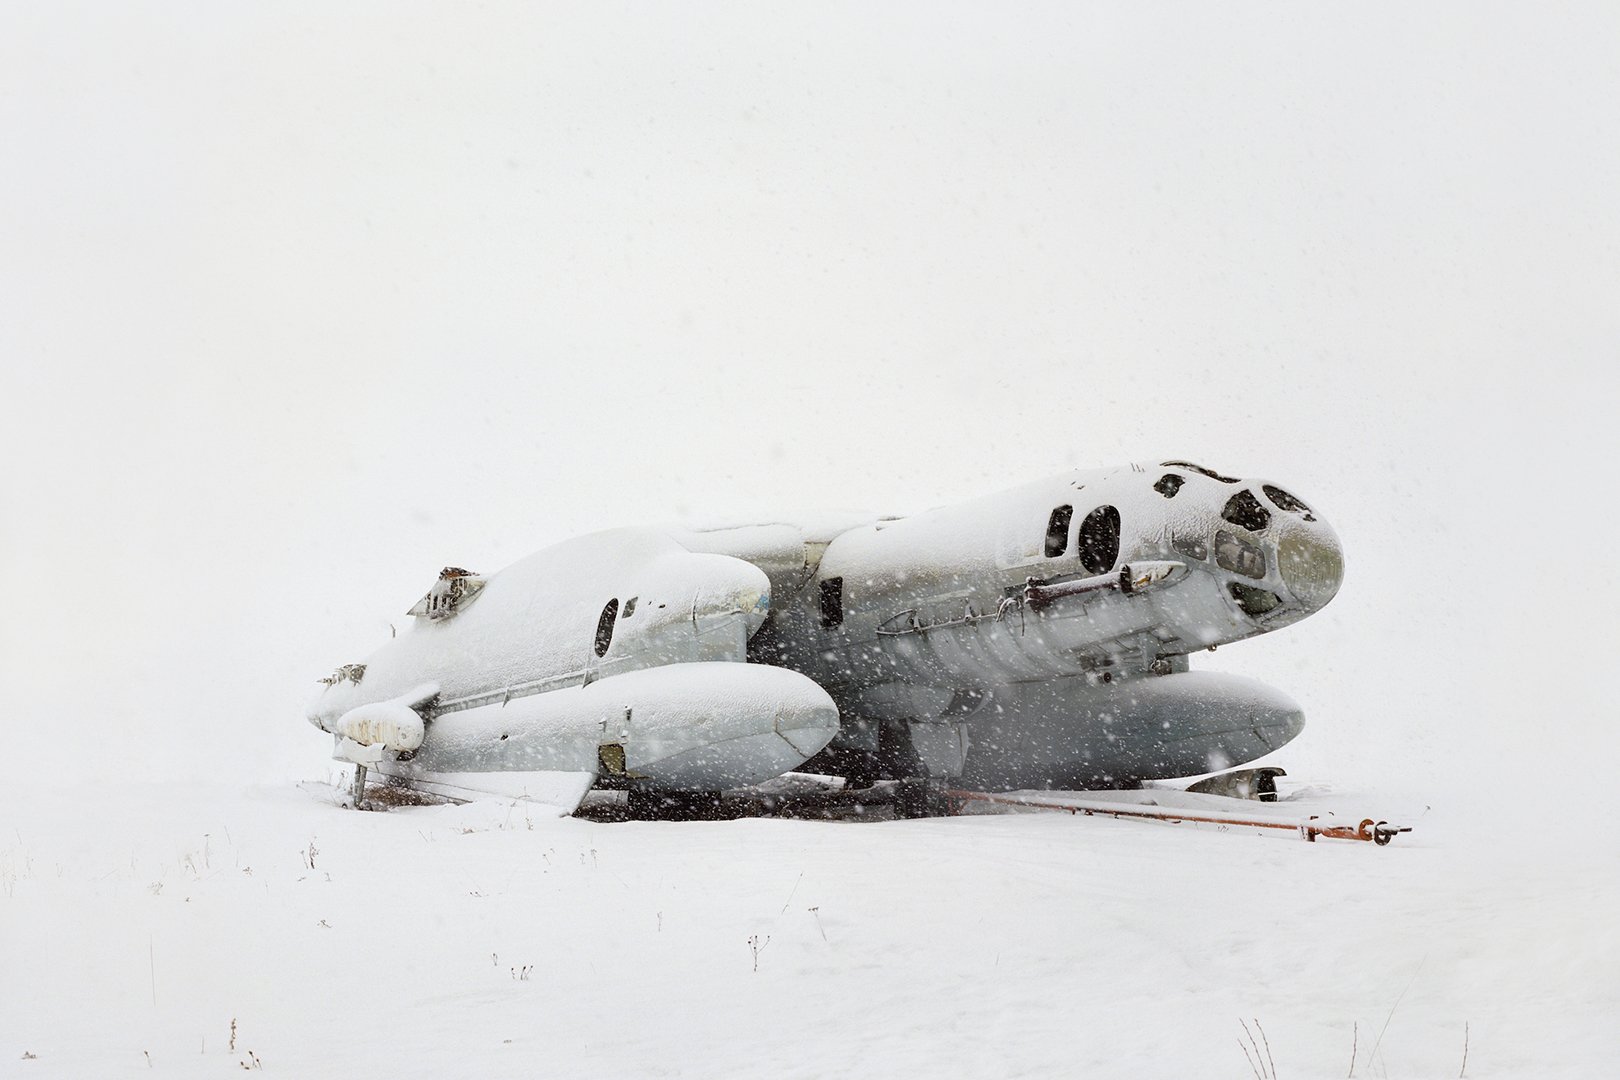 Snow ghosts: Soviet military-industrial power frozen in time